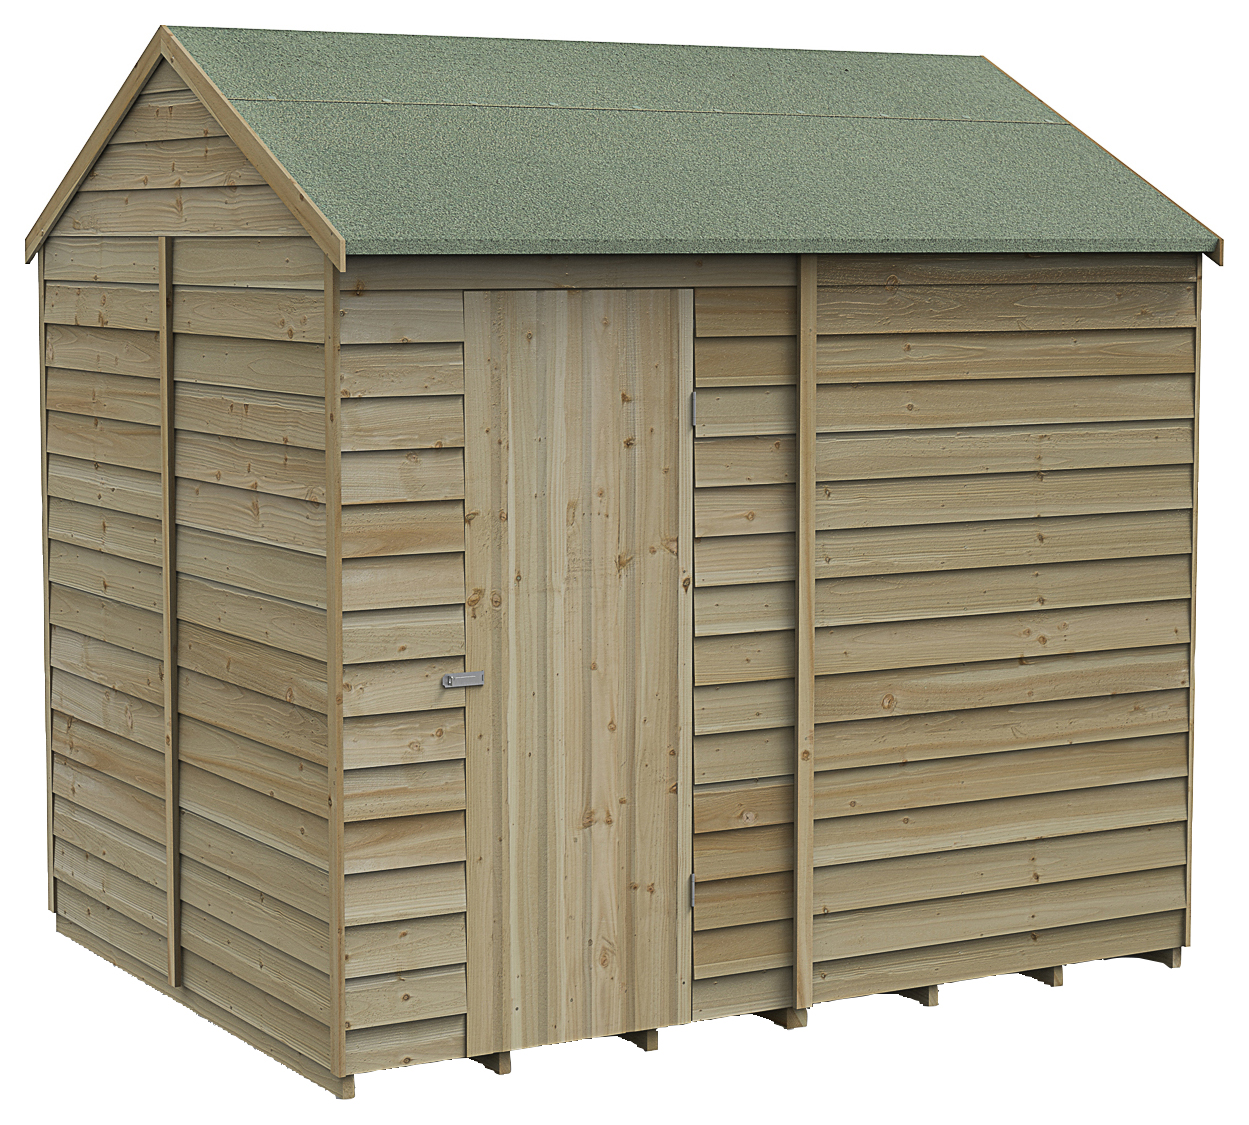 Forest Garden 8 x 6ft 4Life Reverse Apex Overlap Pressure Treated Windowless Shed with Base and Assembly